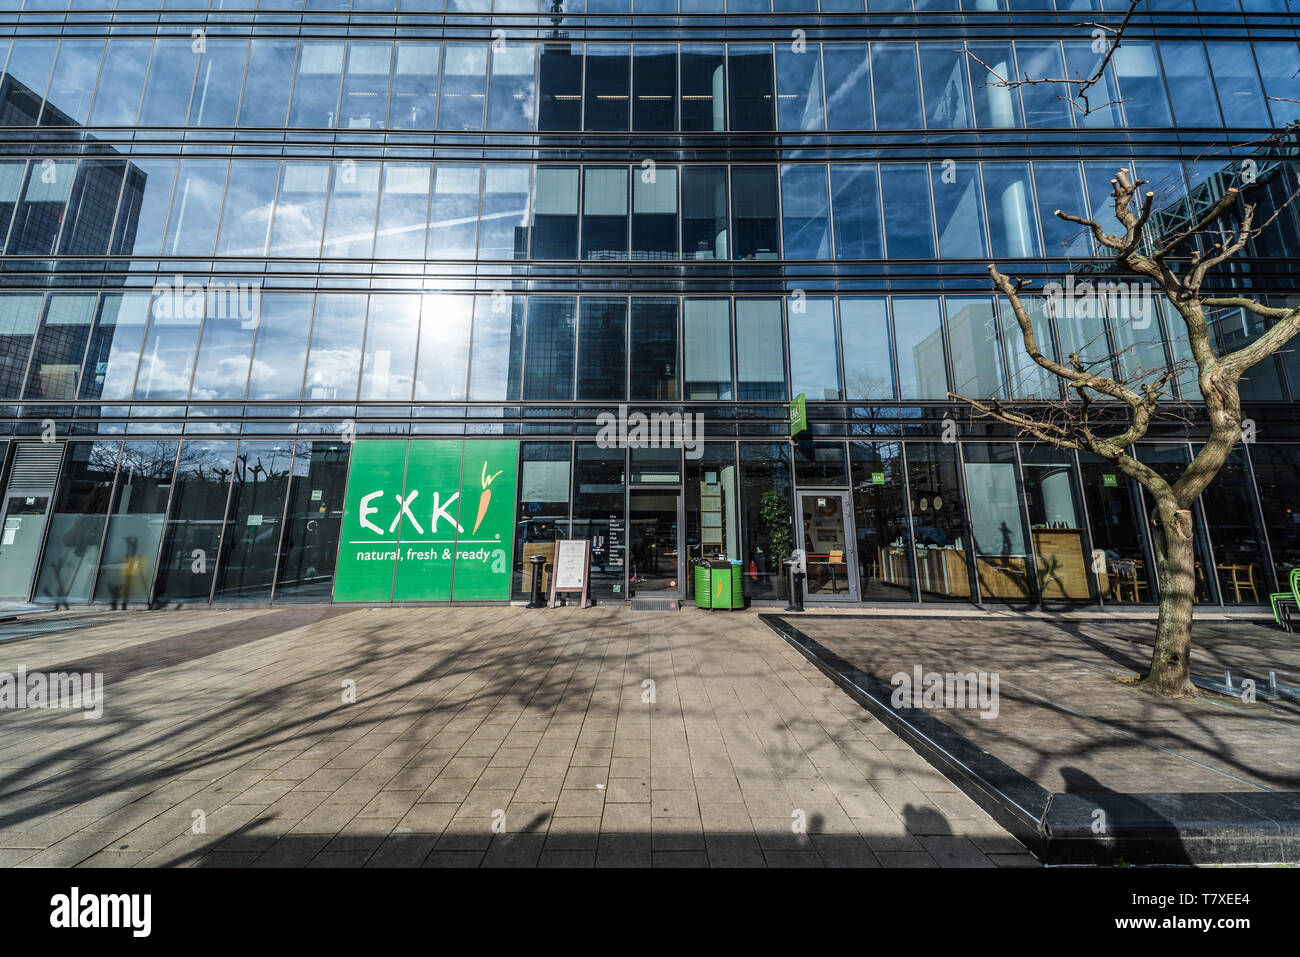 Brussels, Belgium - 03 10 2019: Exki fastfood chain restaurant in the Brussels downtown financial and business district Stock Photo